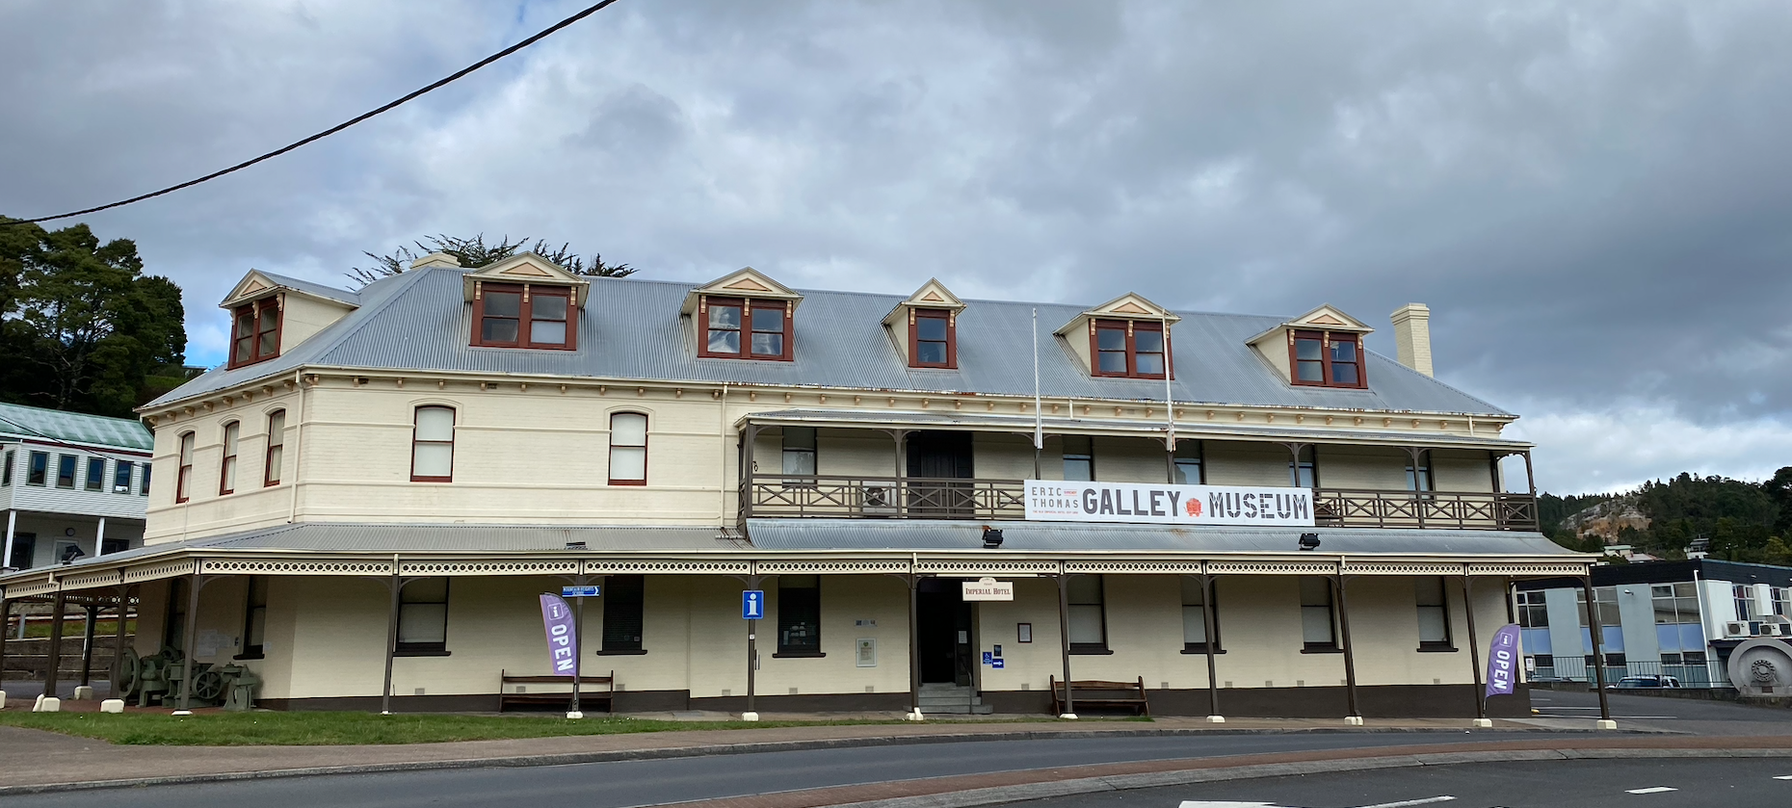 A photo of The Galley Museum facade.